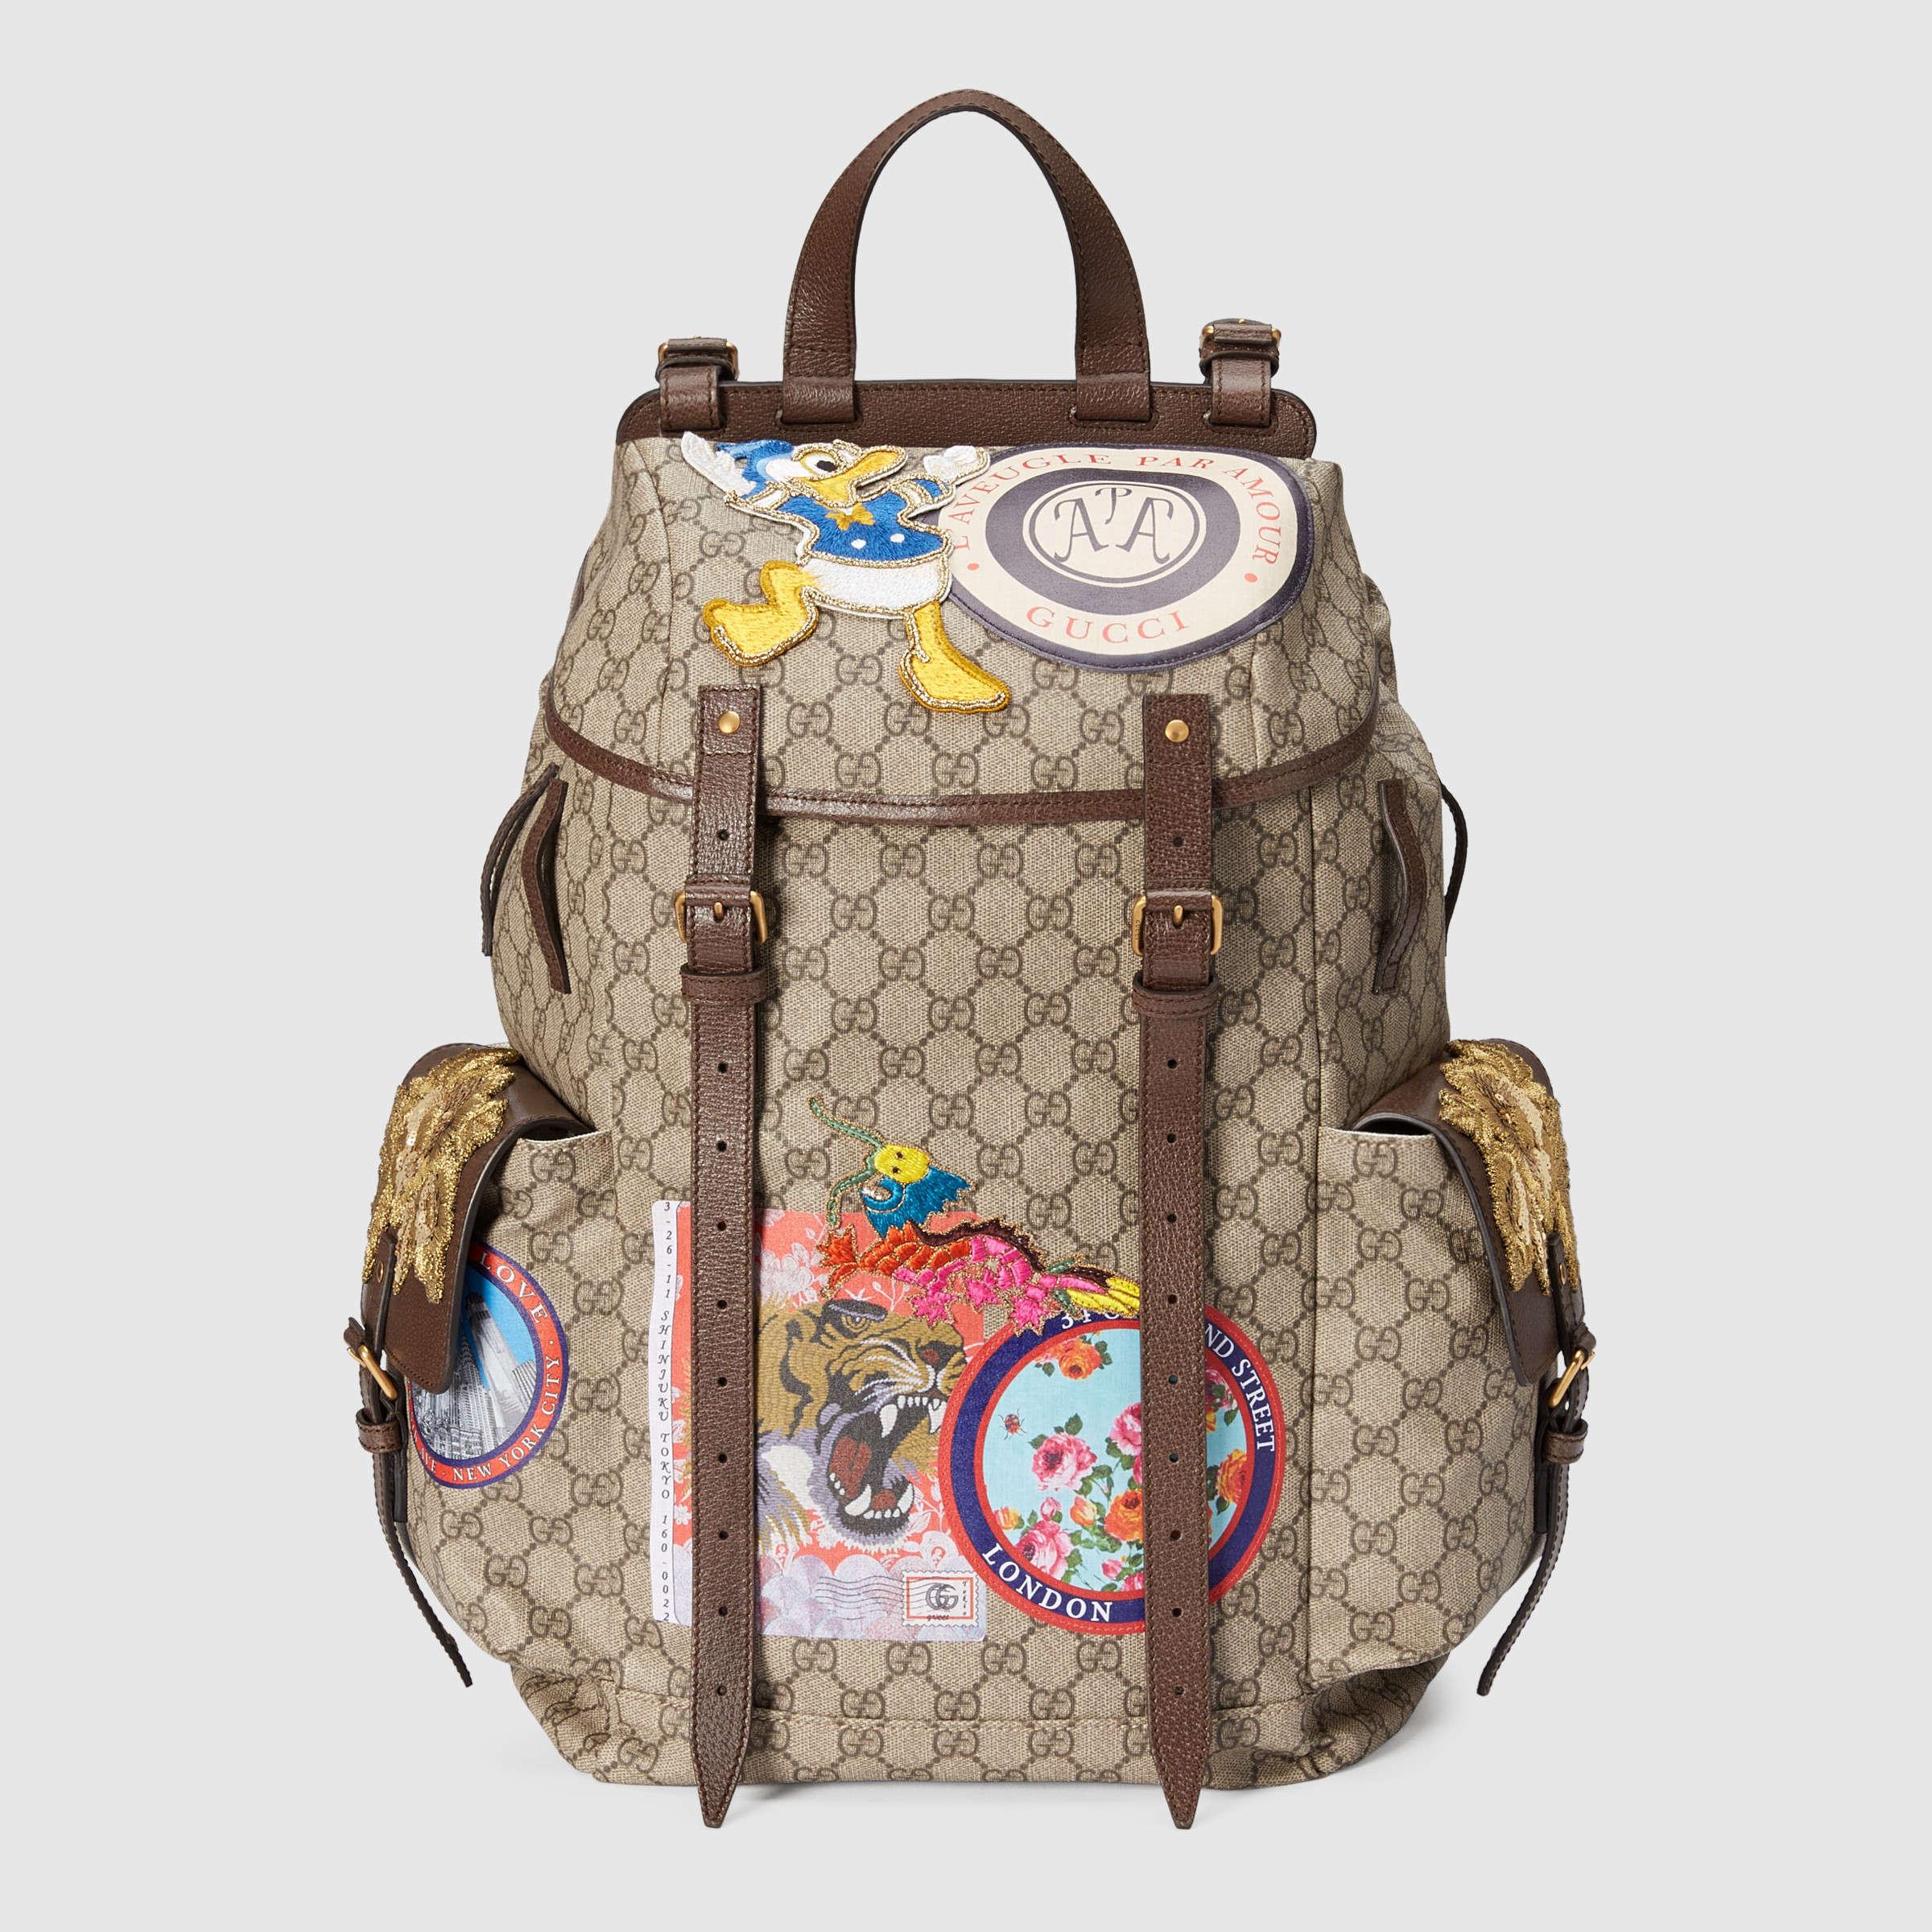 Gucci Leather Soft Gg Supreme Backpack With Appliqués for Men - Lyst